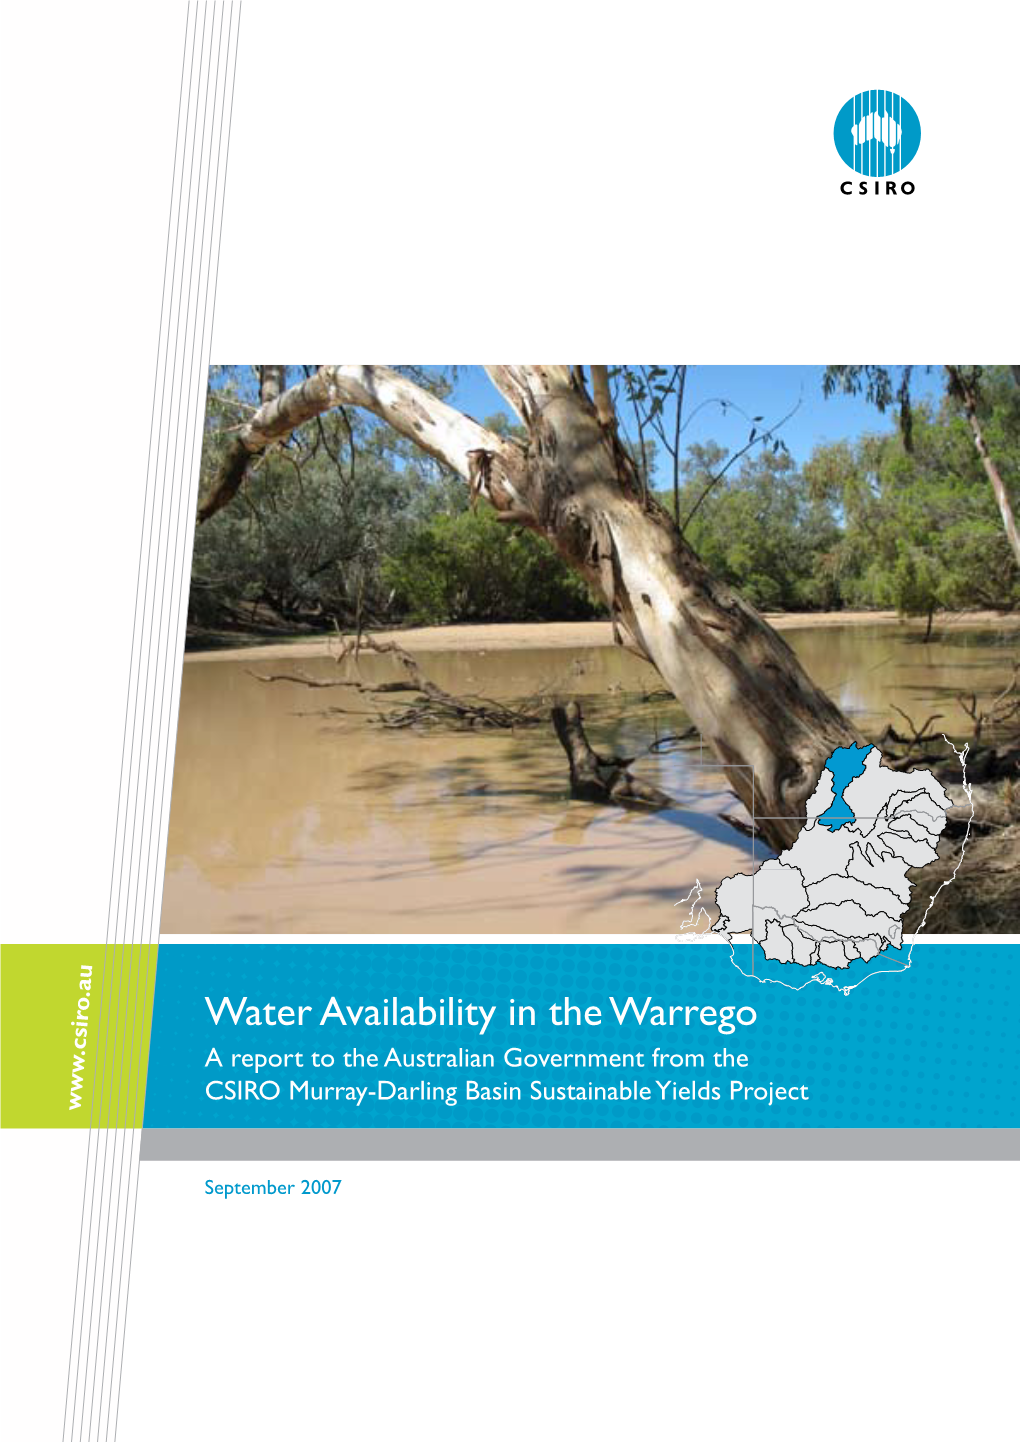 Water Availability in the Warrego a Report to the Australian Government from the CSIRO Murray-Darling Basin Sustainable Yields Project